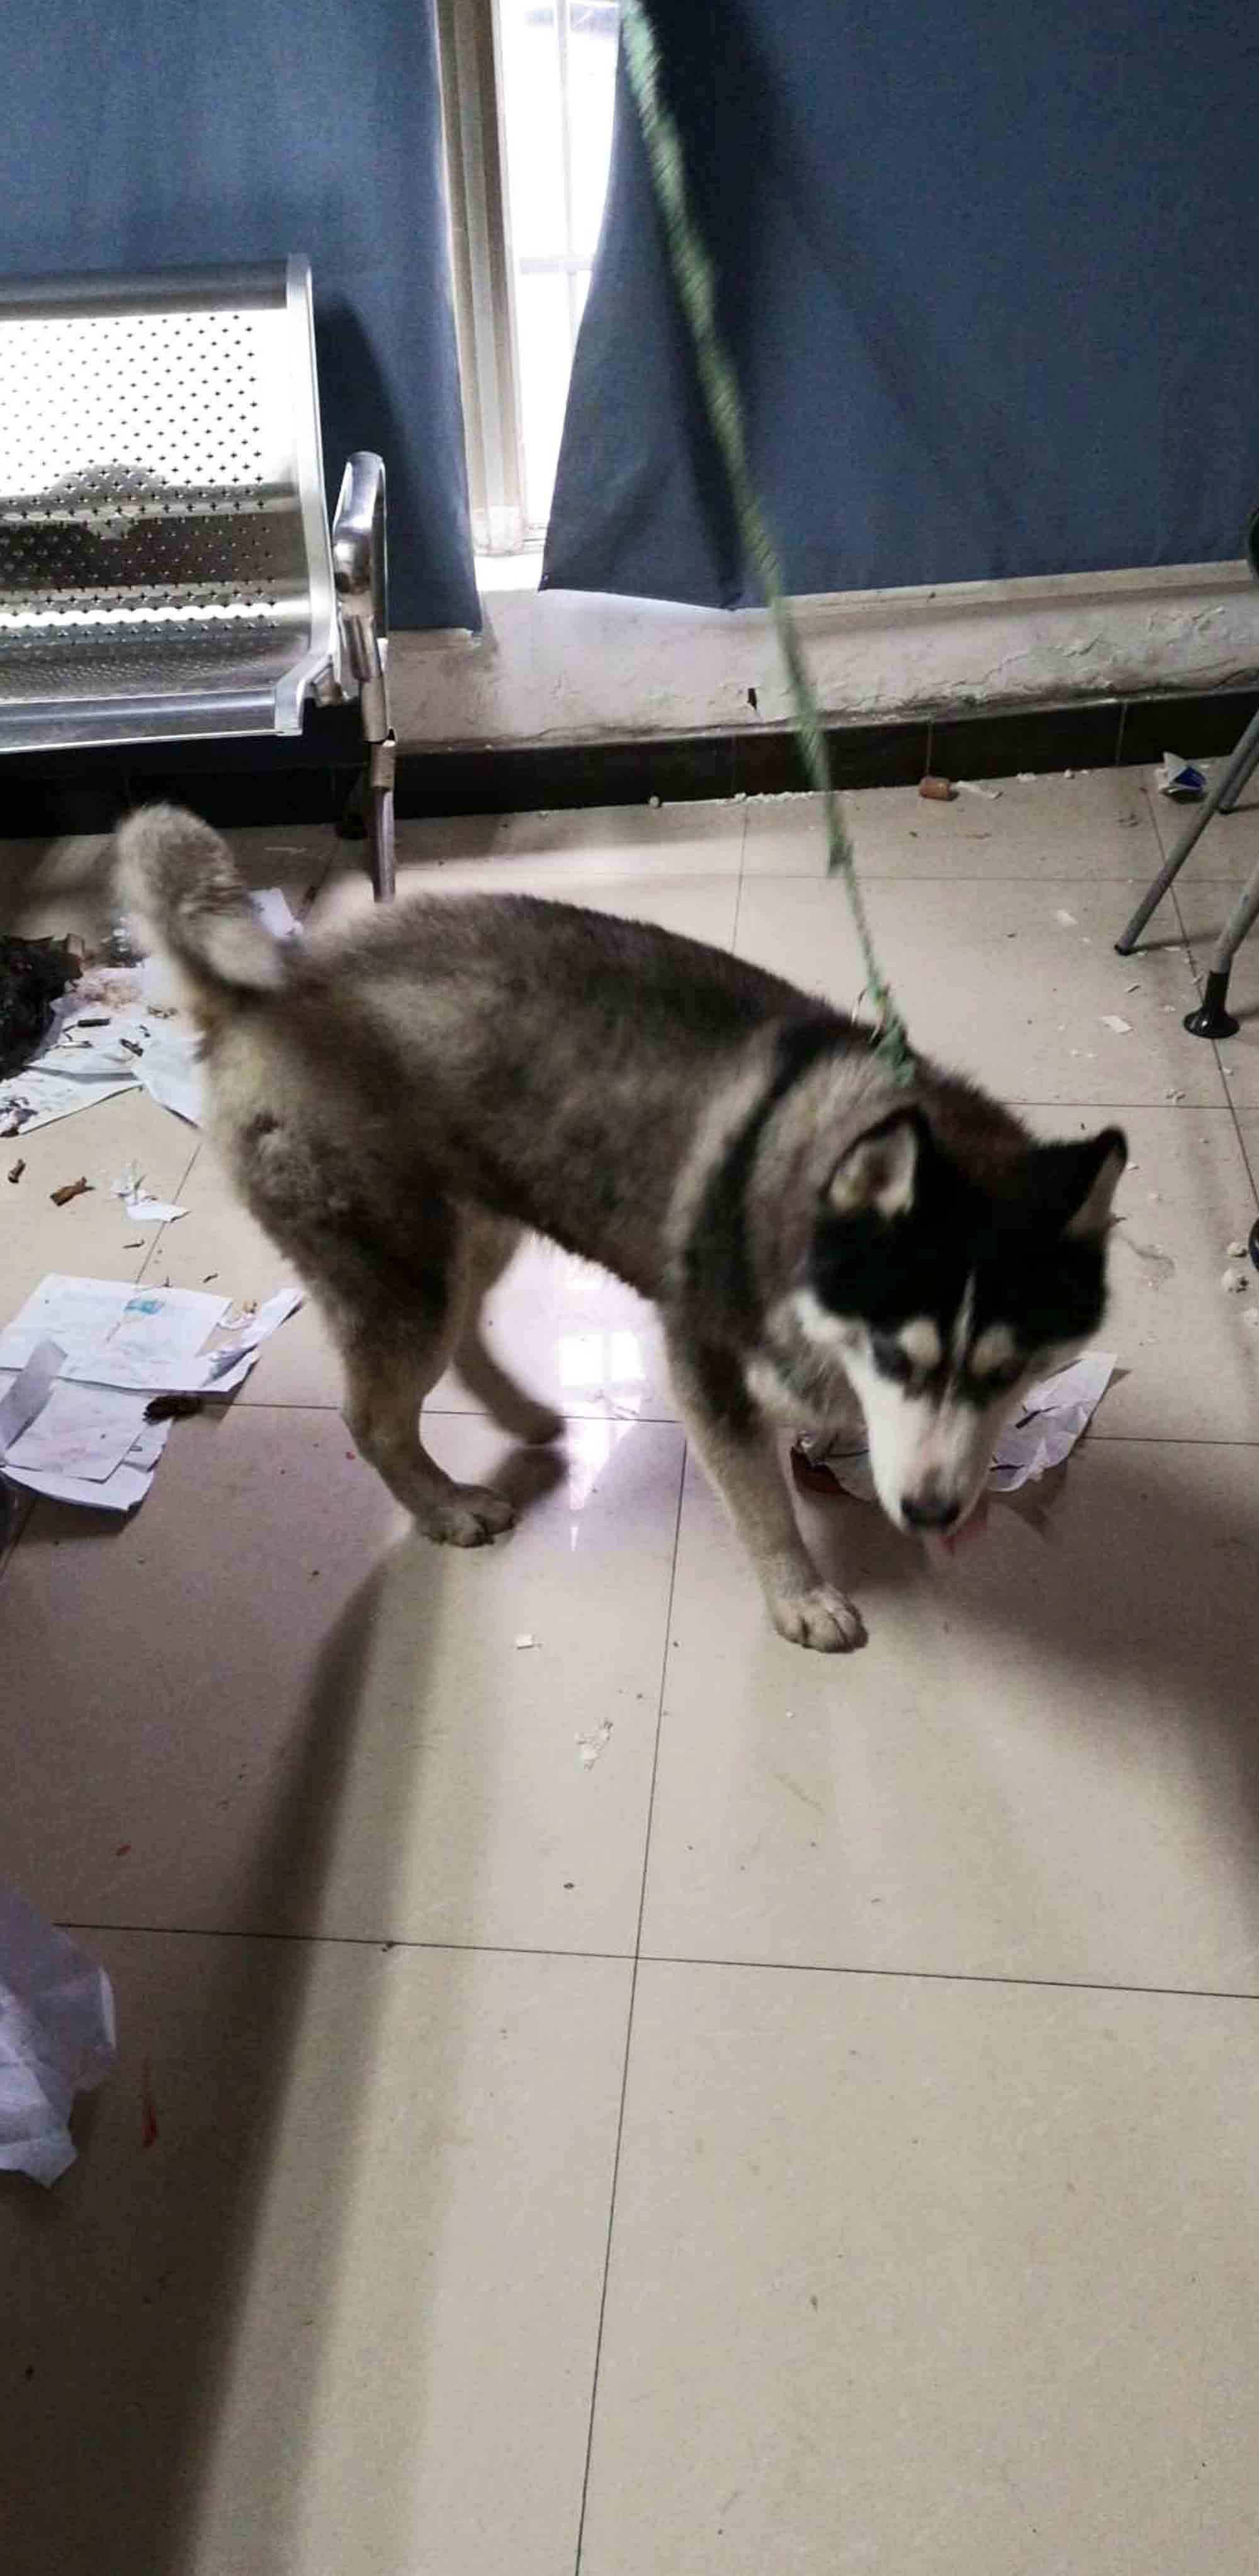 Read more about the article Cop Berates Husky Pup For Eating Police Documents